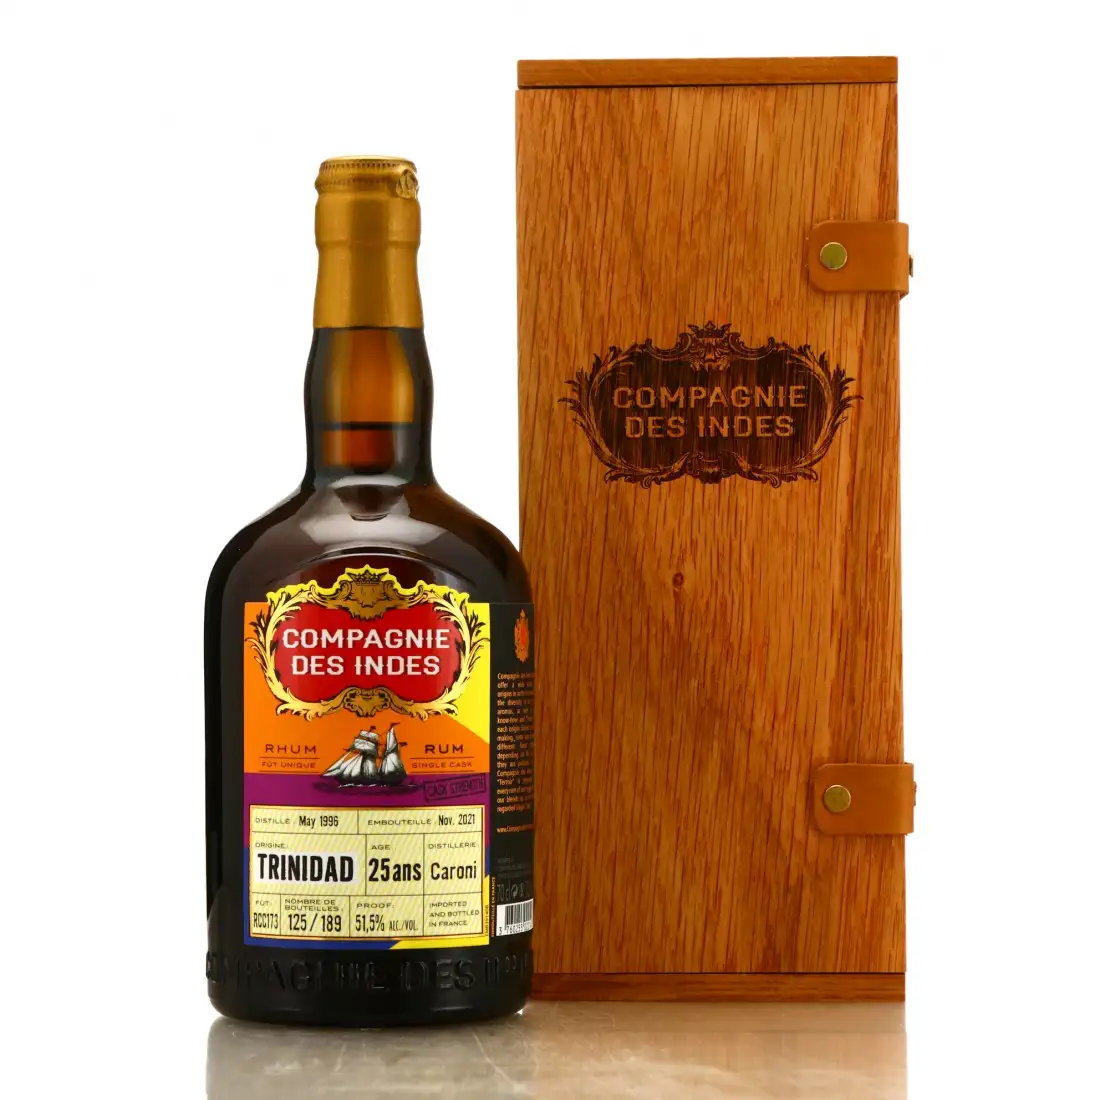 Image of the front of the bottle of the rum Trinidad LWR